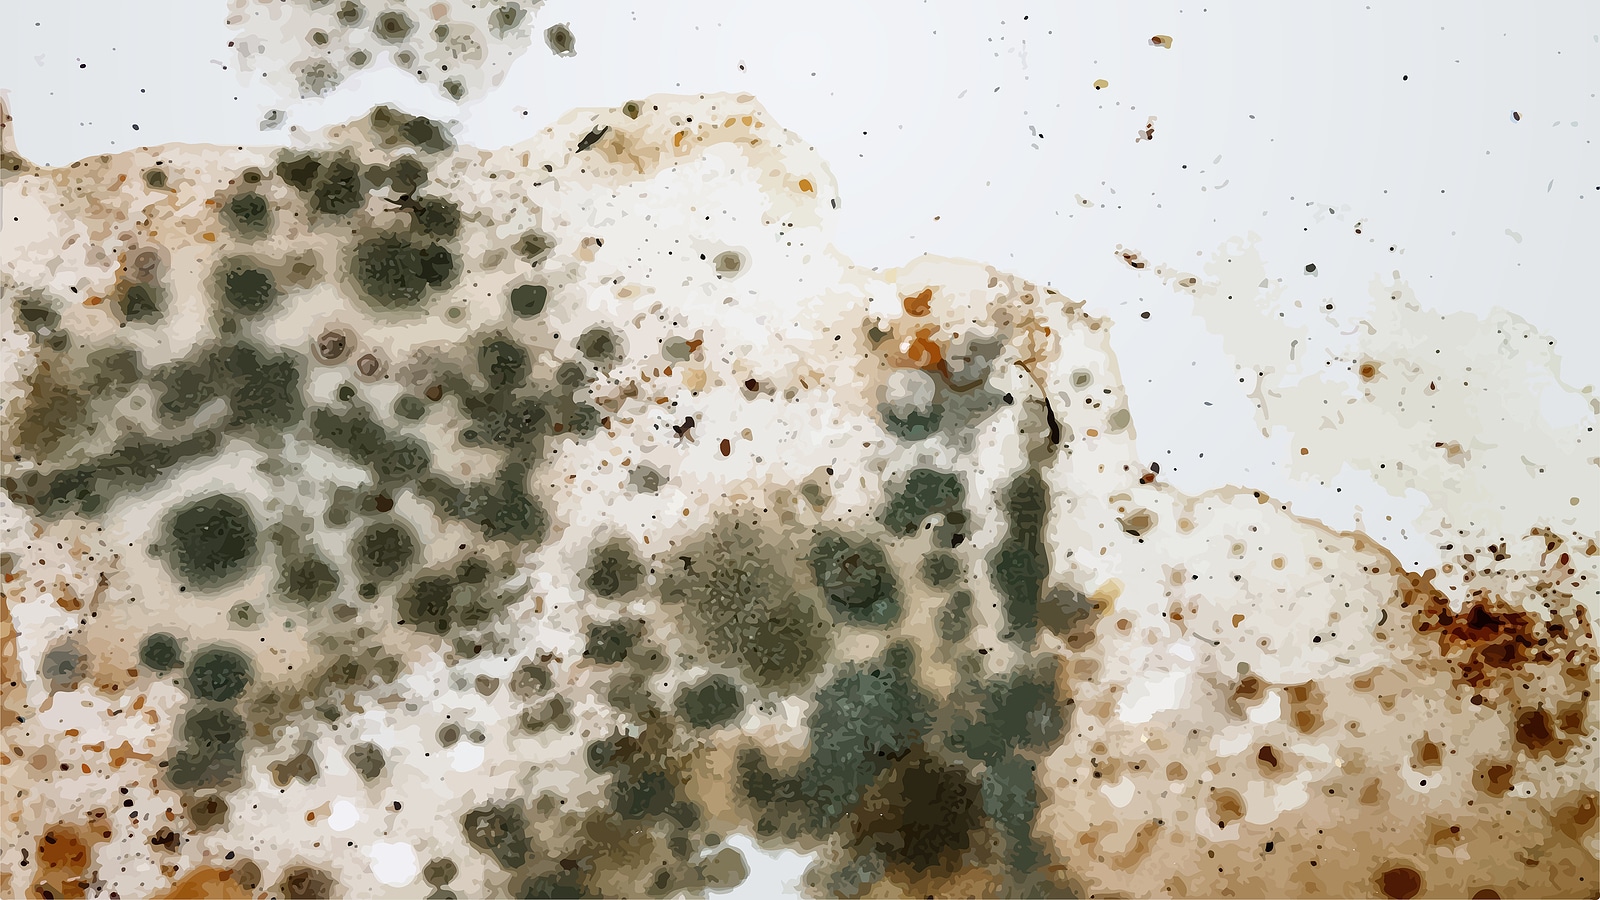 What Every Consumer Should Understand About Air Sampling for Mold